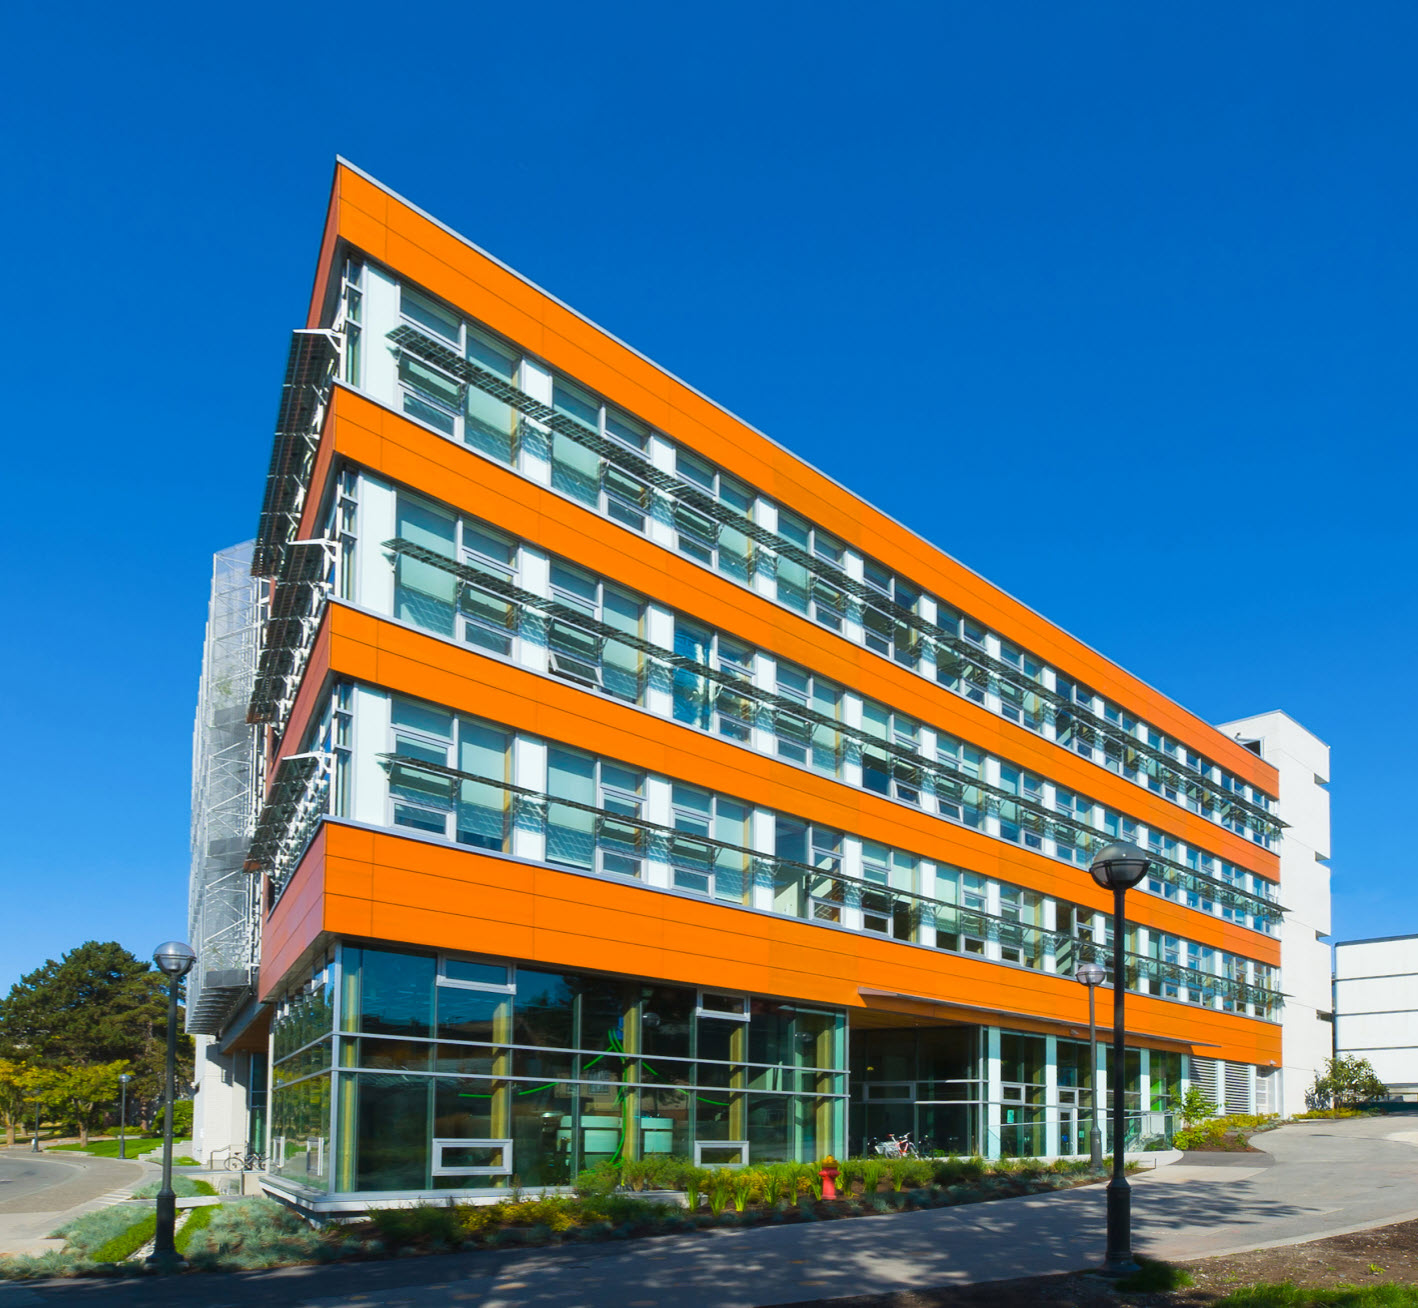 Centre for Interactive Research on Sustainability